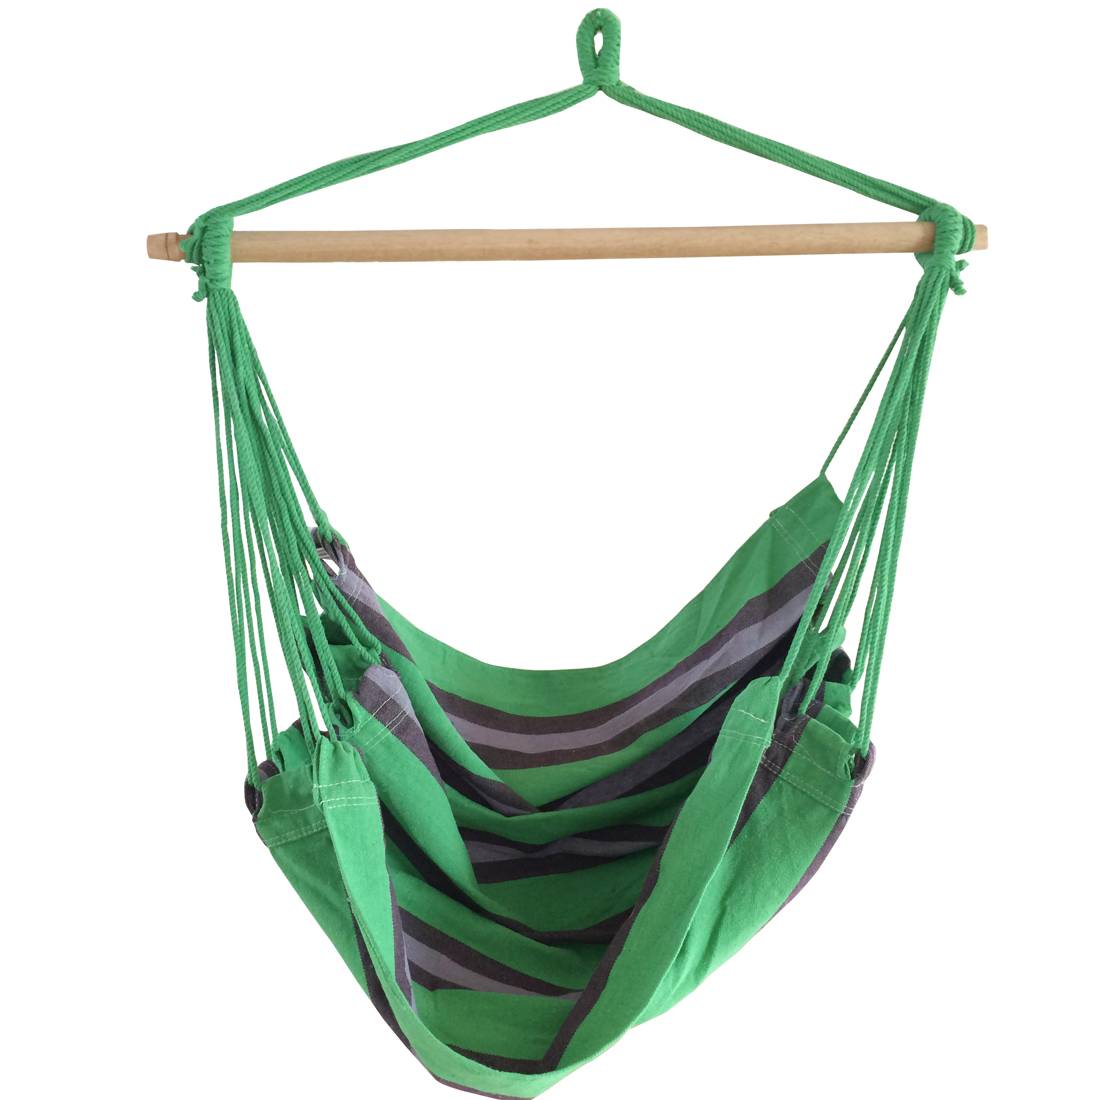 Striped hammock hanging chair without pillows swing hammock chair